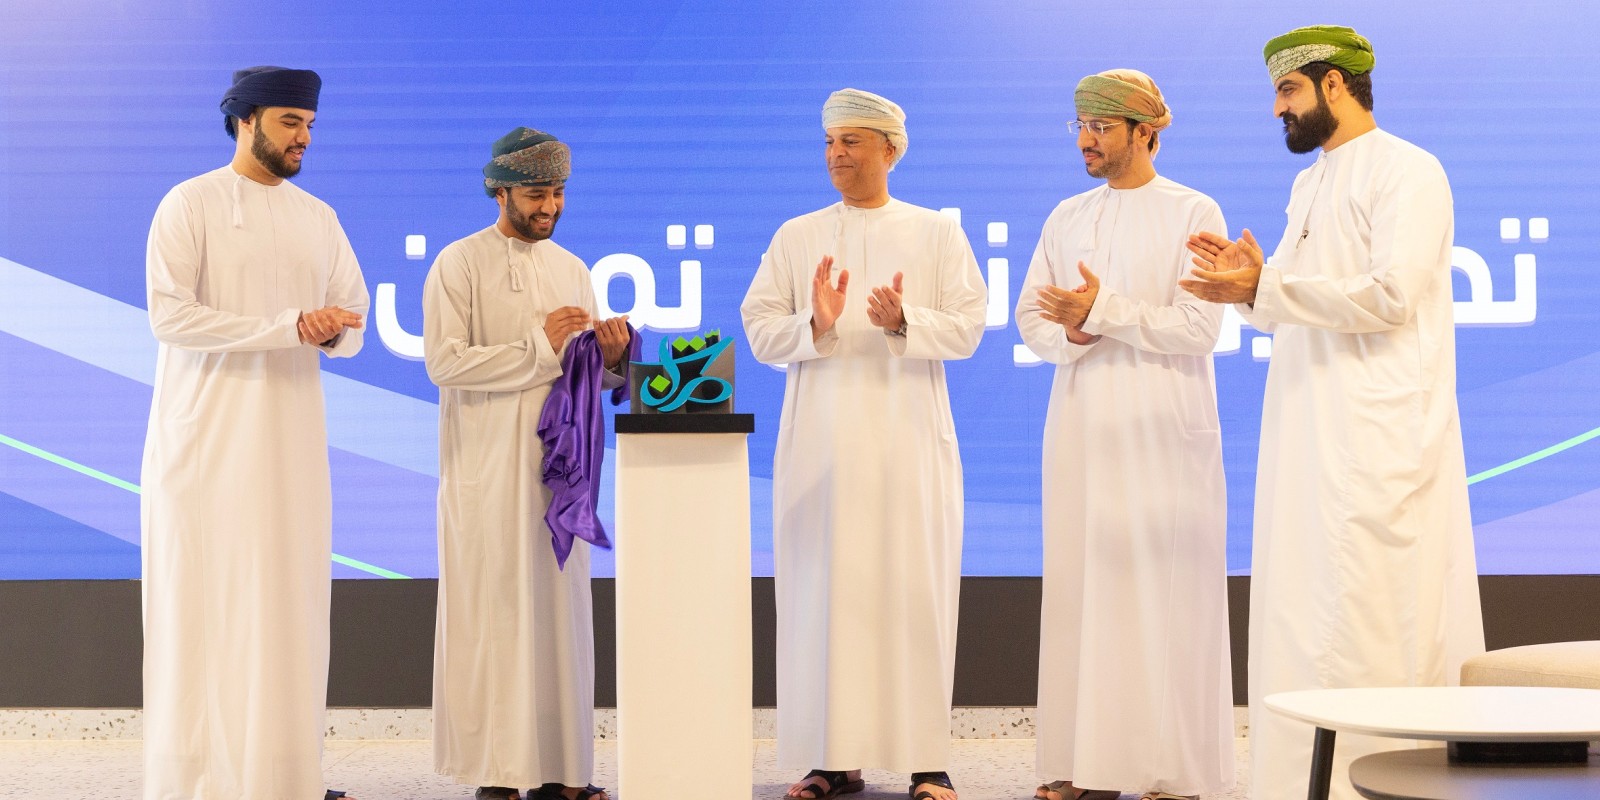 OMAN OIL MARKETING COMPANY AND YOUTH CENTER LAUNCH ‘TMAKON’ PROGRAMME TO SUPPORT OMANI YOUTH